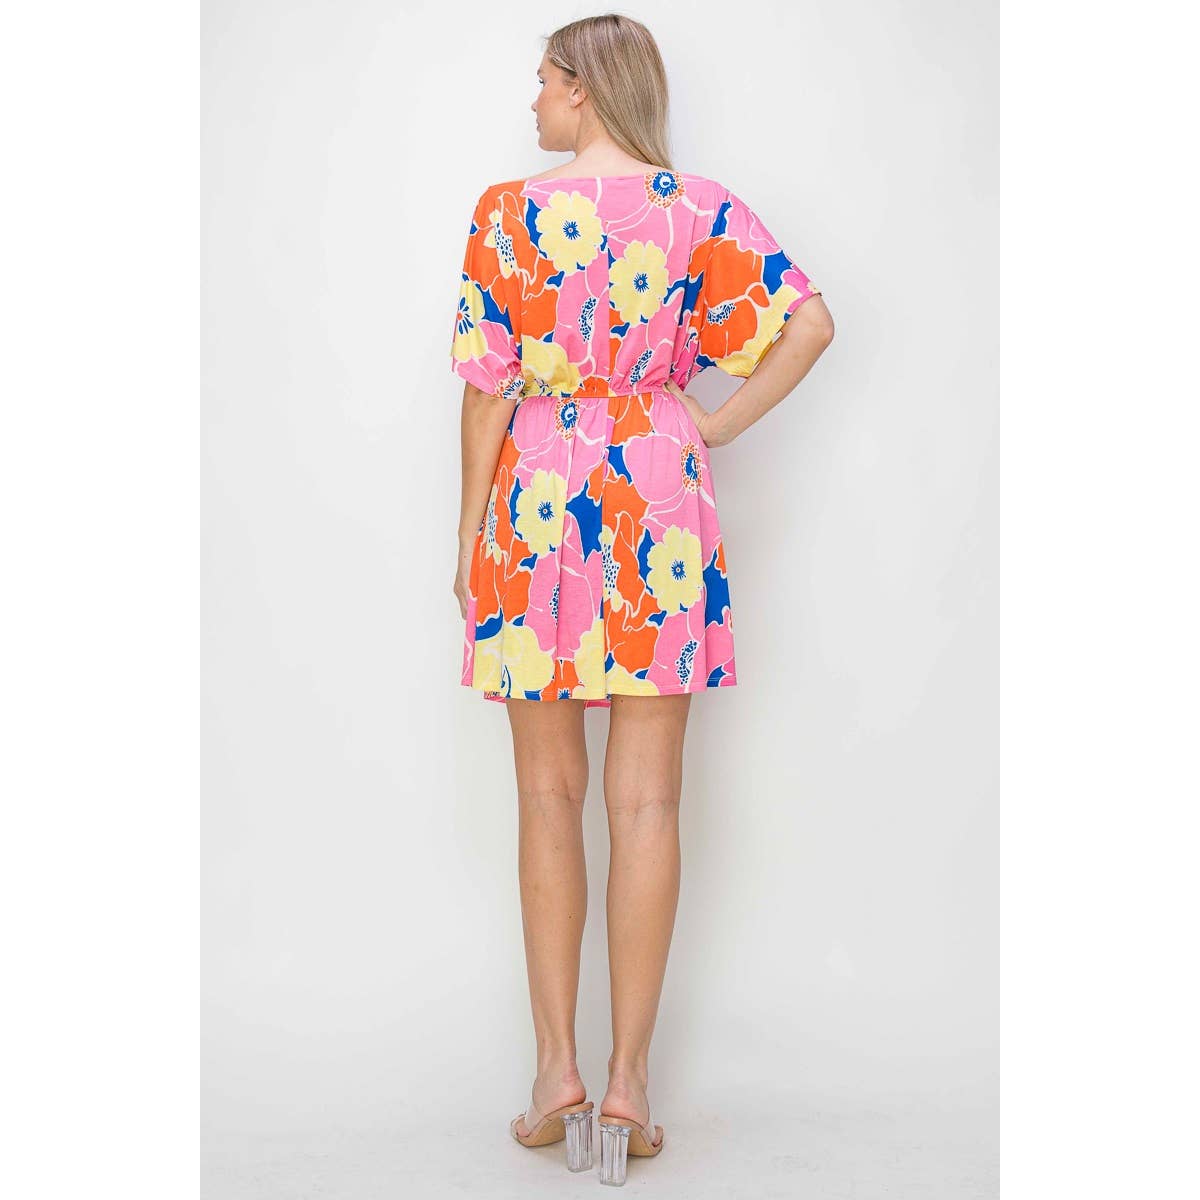 OL24A267-9-WIDE BOAT NECK FLORALL PRINT DRESS: S / PINK MULTI